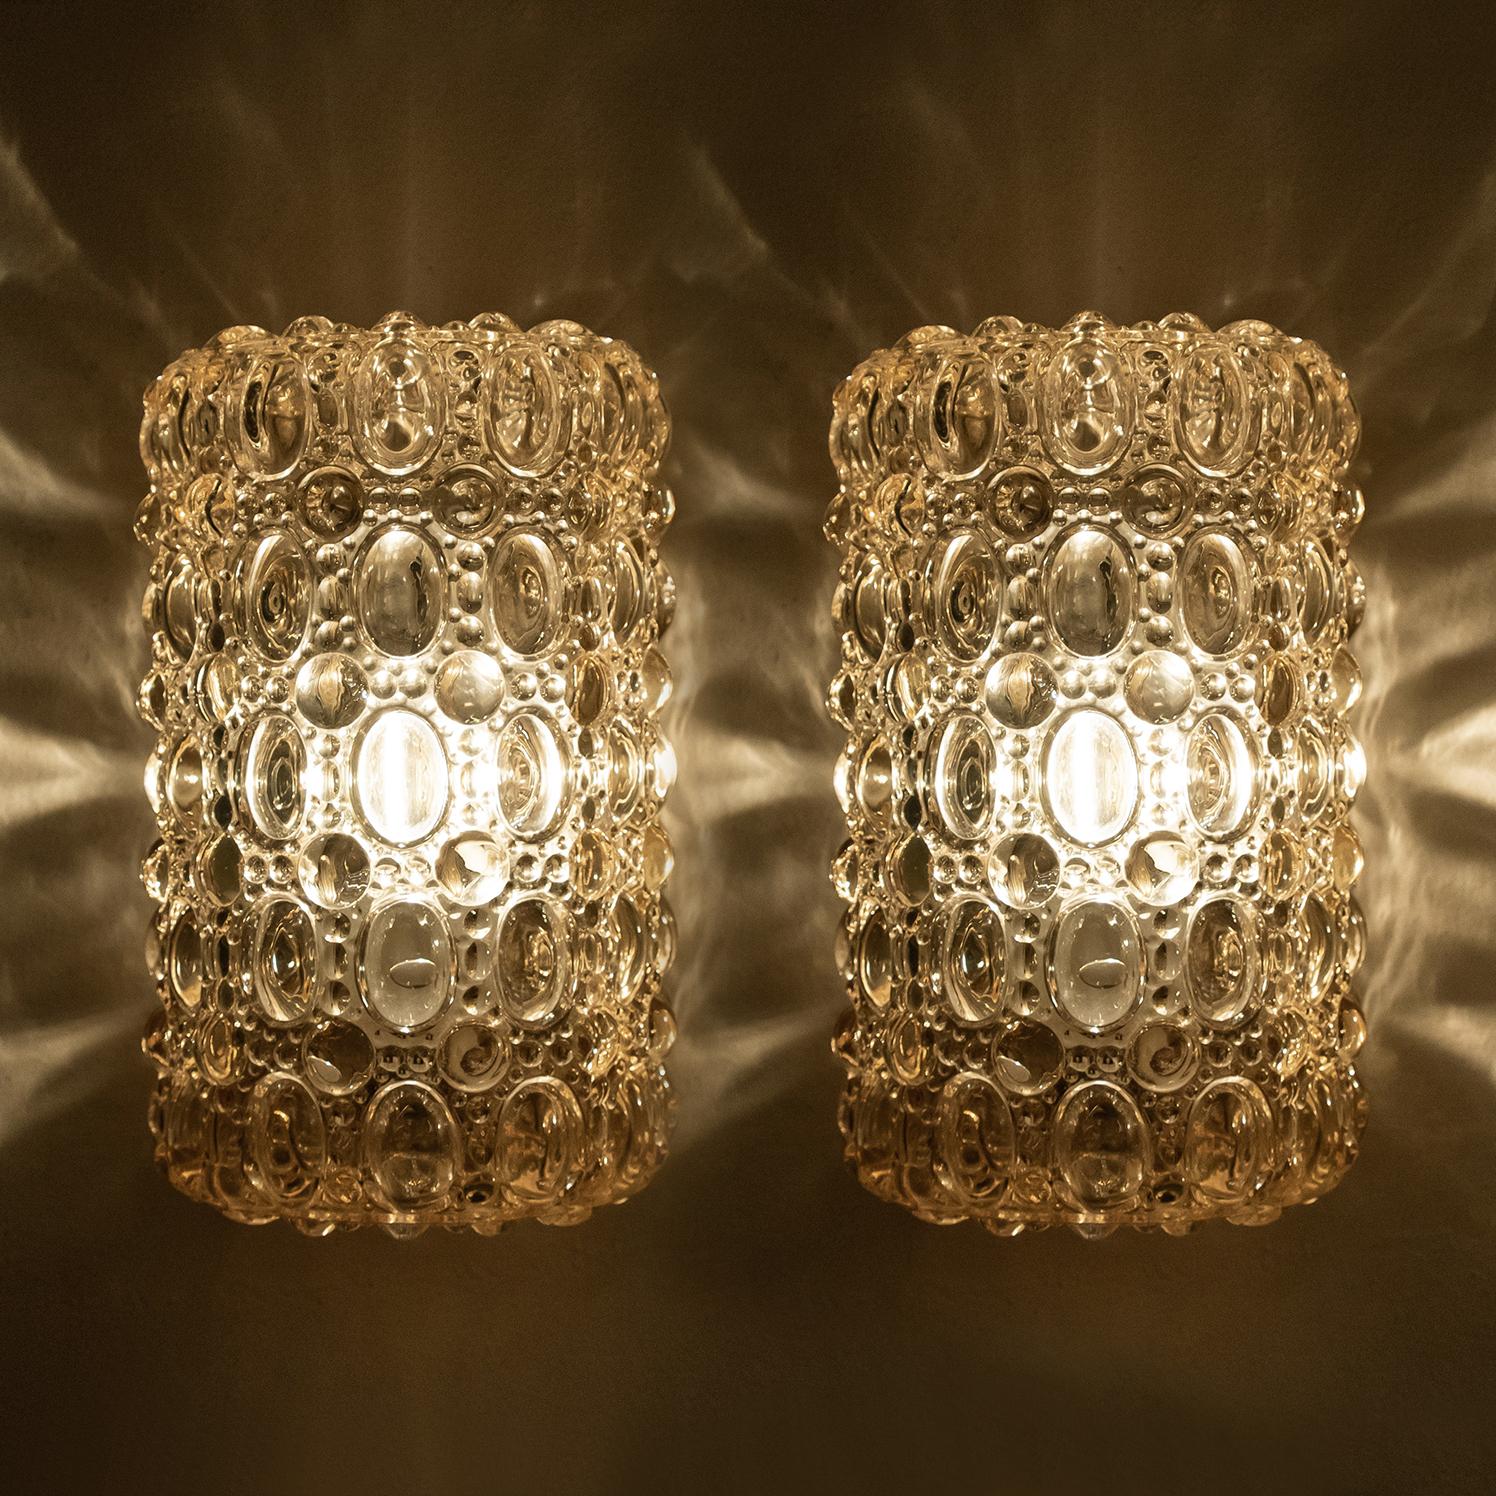 A pair of beautiful bubble glass wall lights designed by Helena Tynell for Glashütte Limburg. A design classic, the amber colored tone of the handblown glass gives a wonderful and warm glow. 

Heavy quality and in excellent vintage condition.